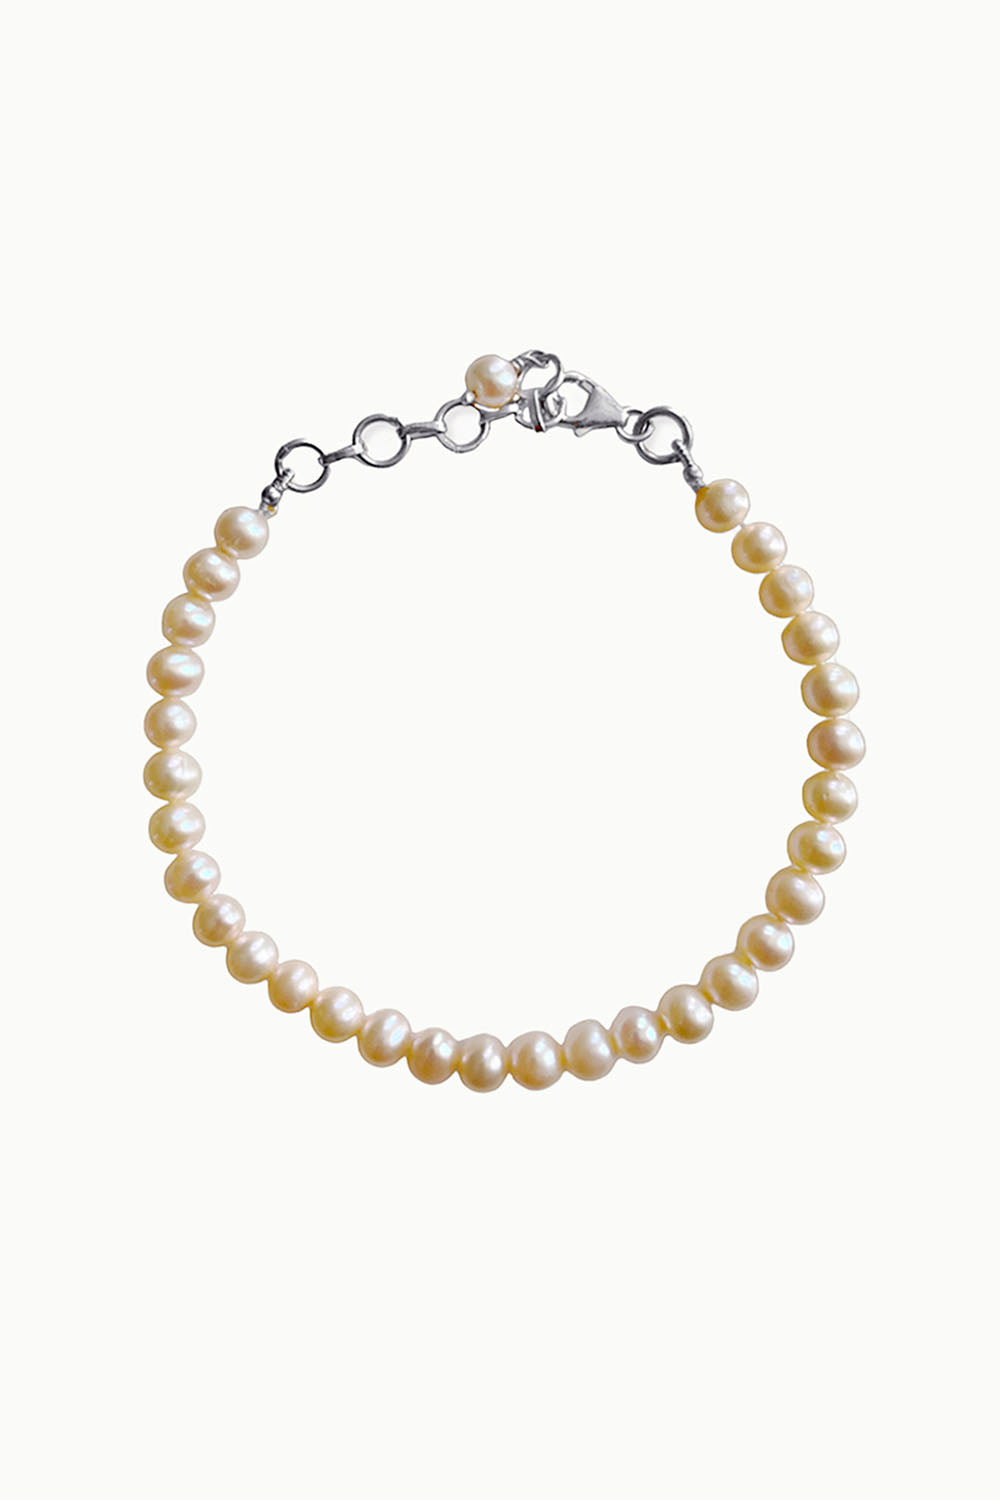 Sivalya Classic Natural Pearls Strand Bracelet in Sterling Silver - Peach